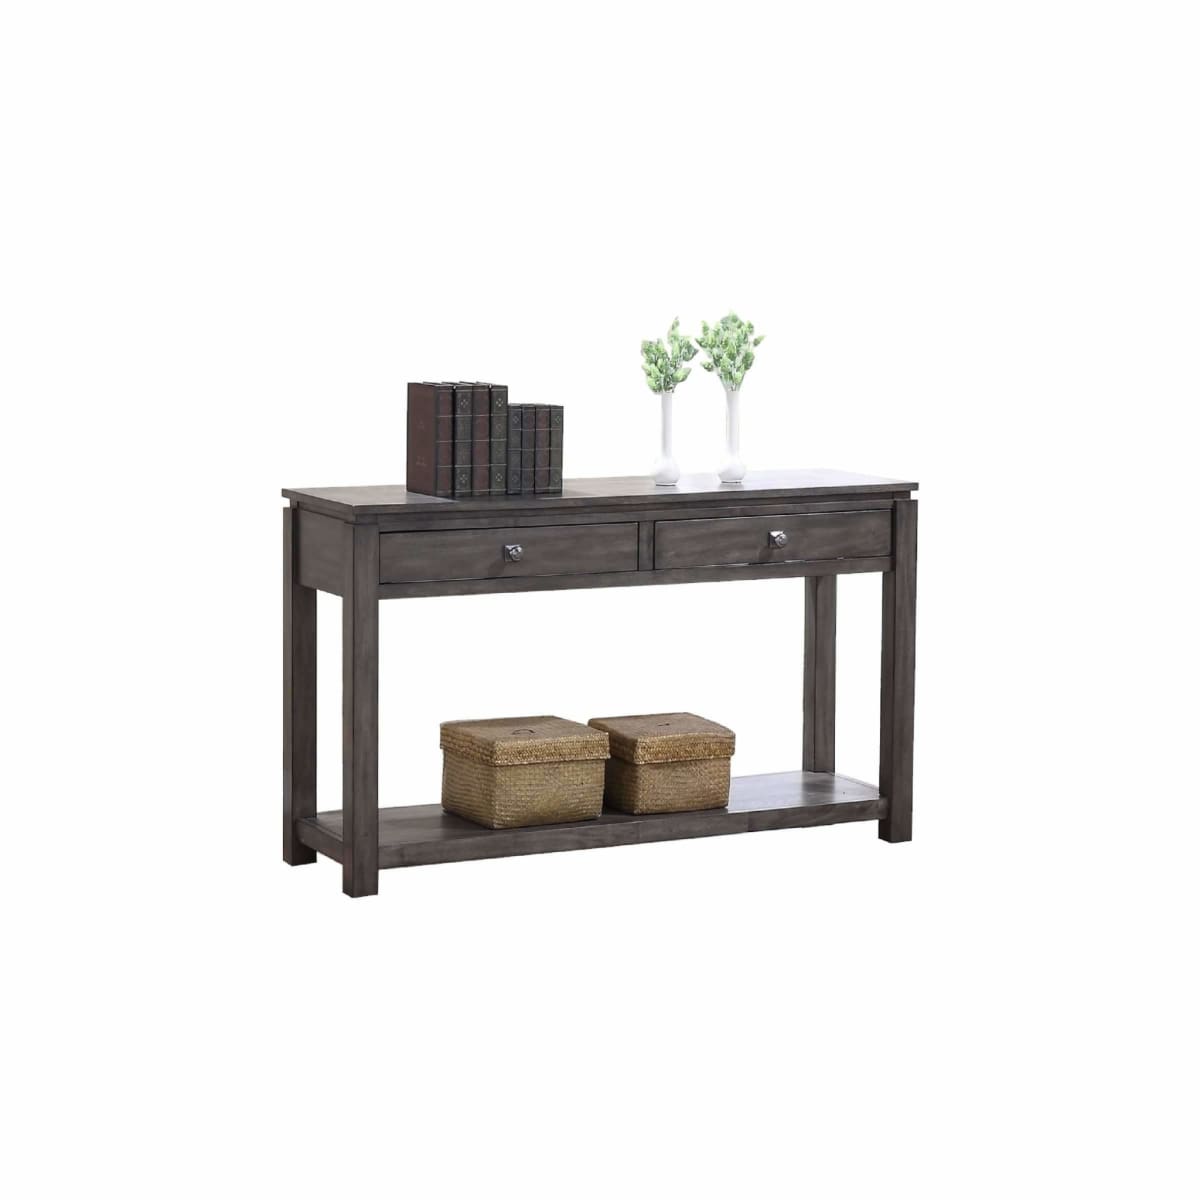 Lancaster 53 Sofa Table - CONSOLE TABLE